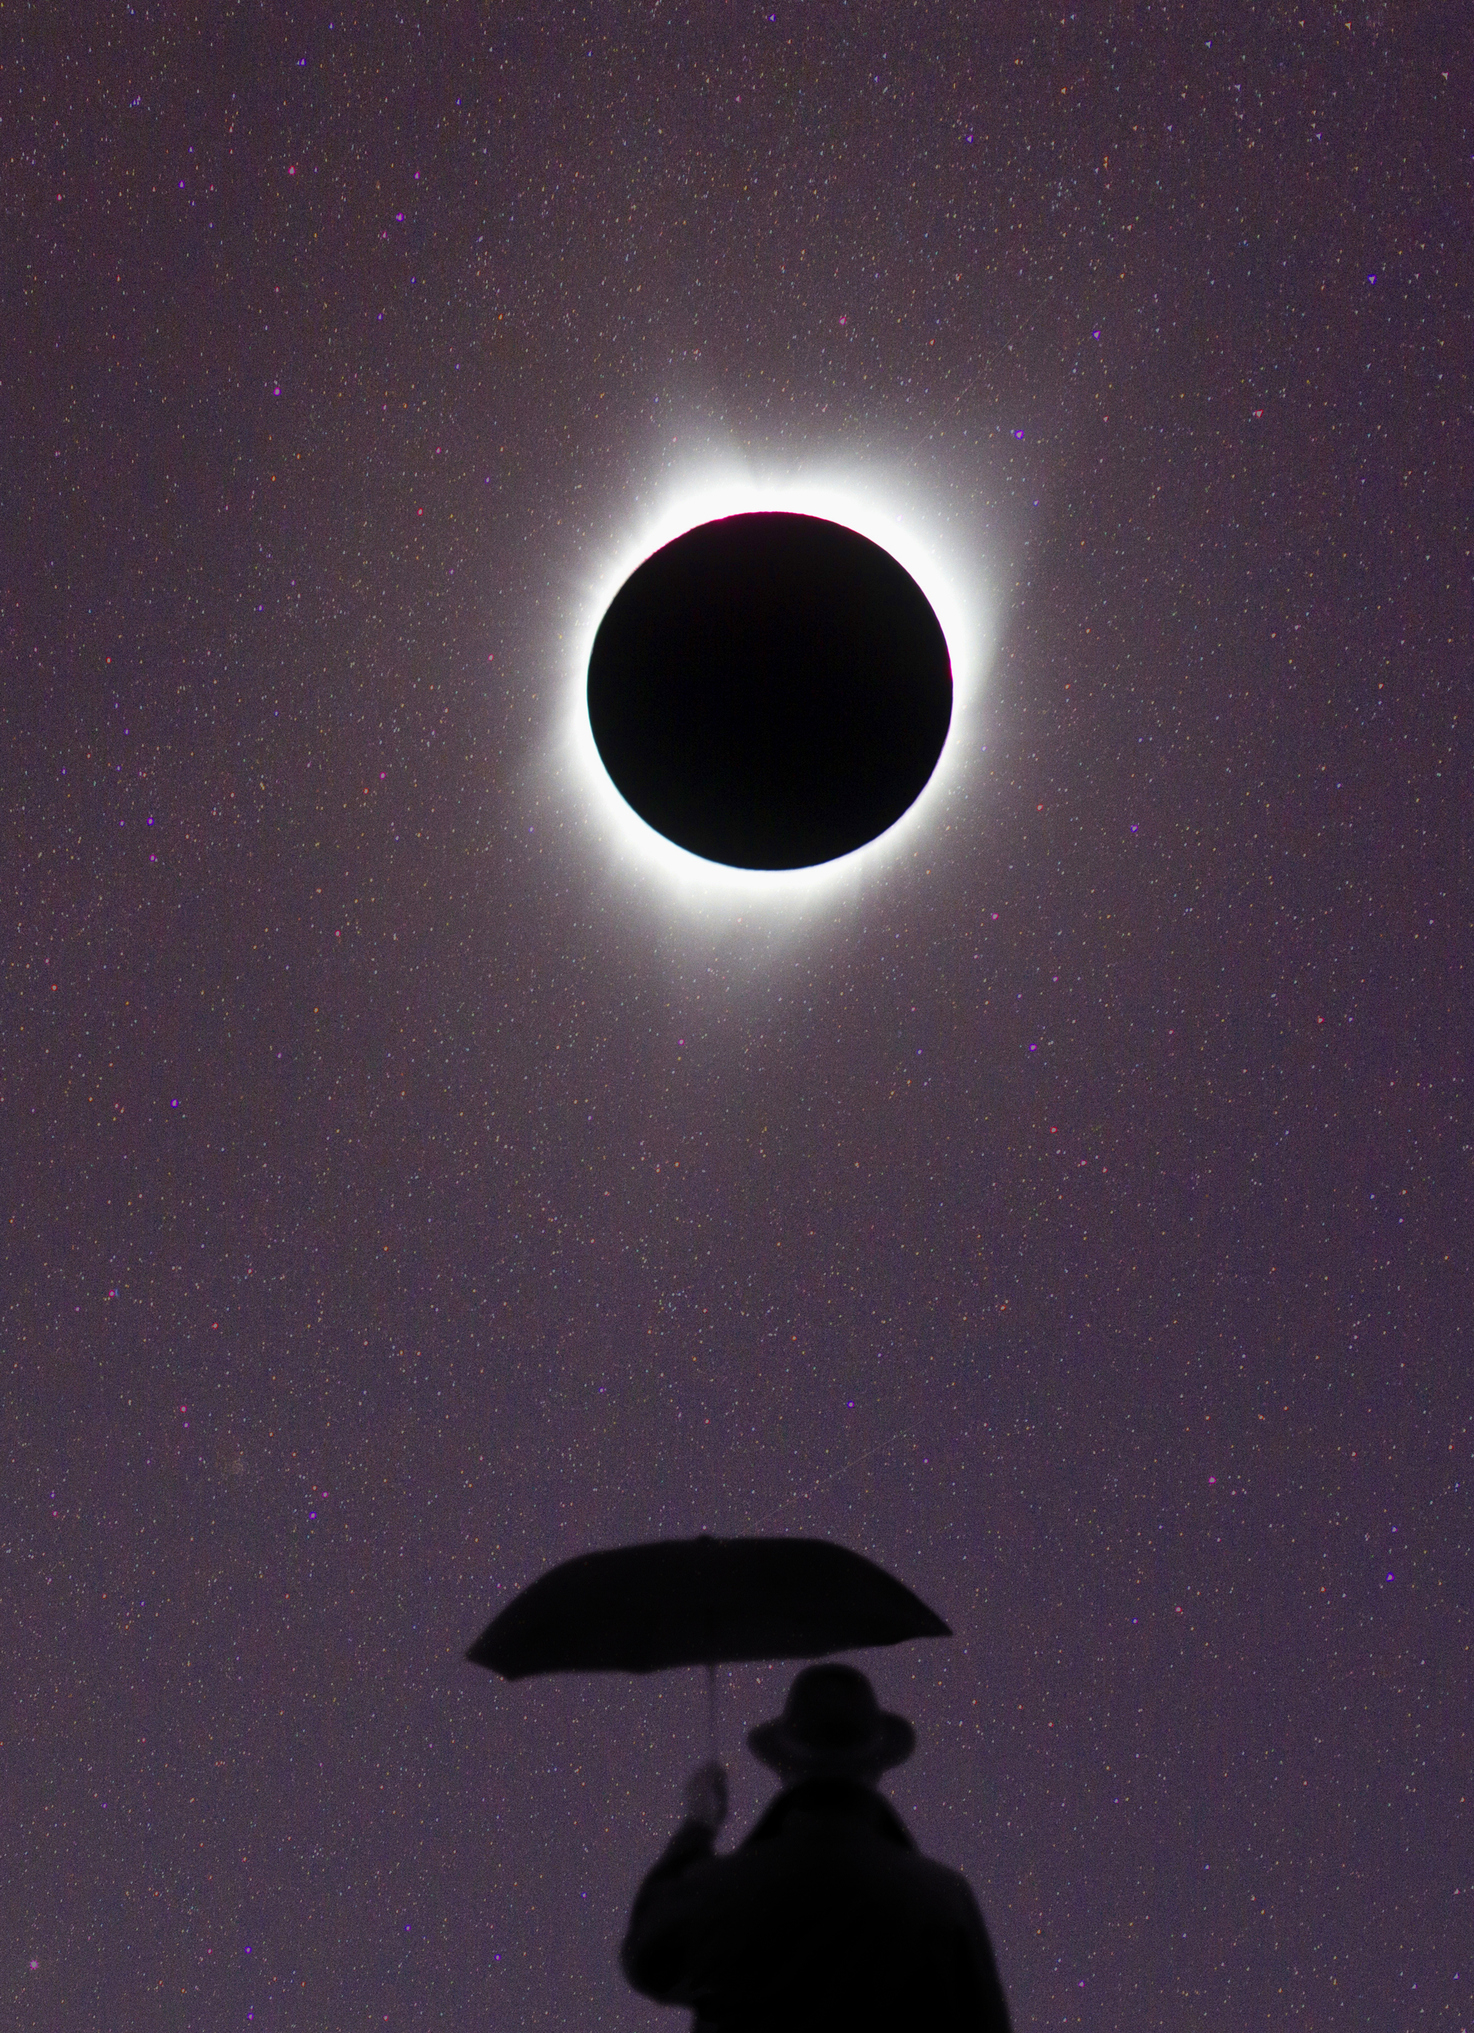 Solar eclipse with a silhouette of a person holding an umbrella underneath